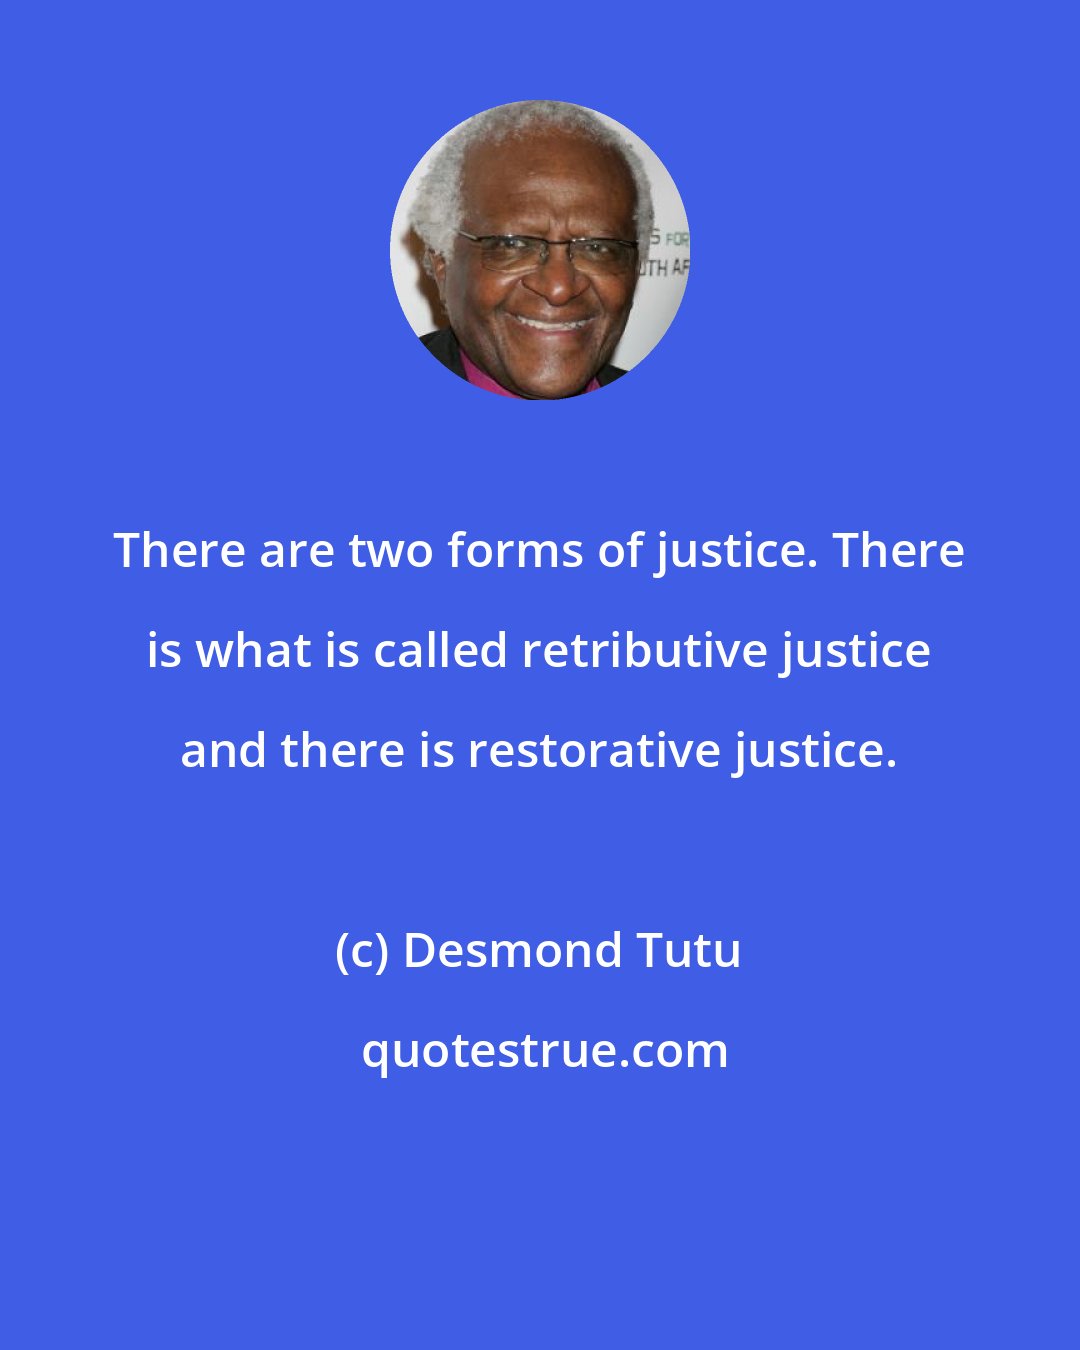 Desmond Tutu: There are two forms of justice. There is what is called retributive justice and there is restorative justice.